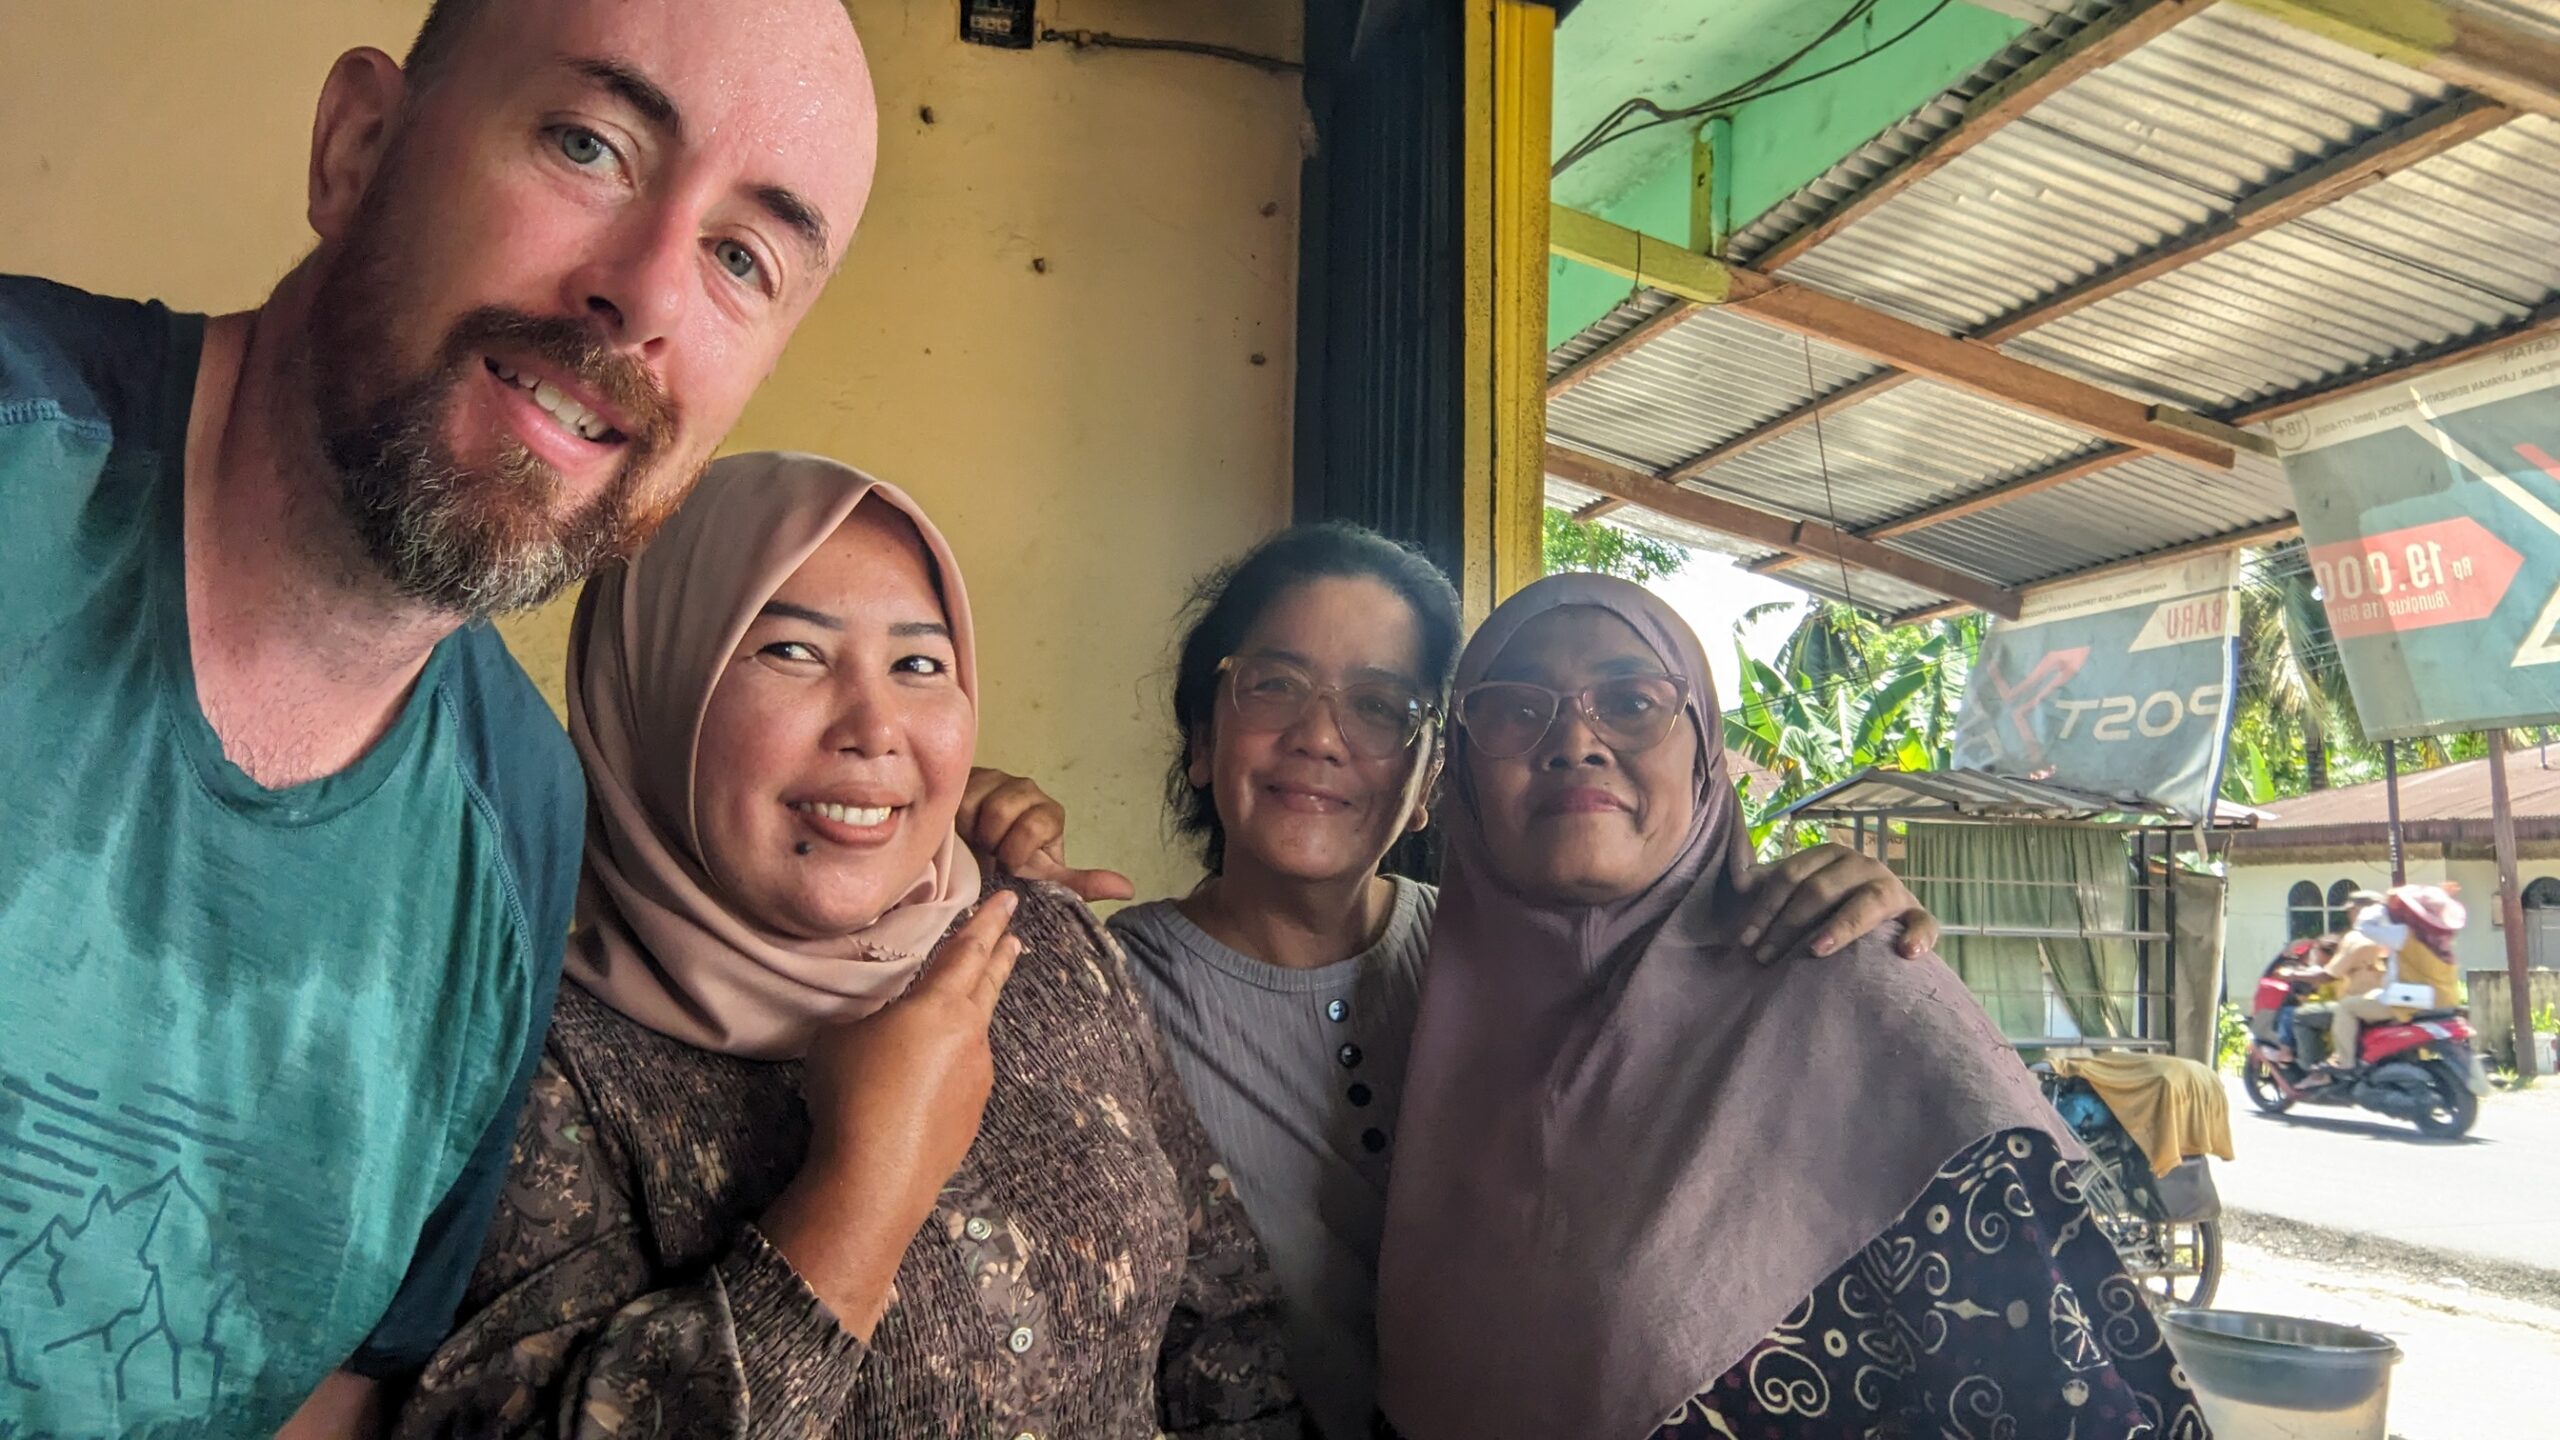 Sumatra - the kindess of people are always on show. Here a owner asked for a selfie with her friends after giving me a free lunch.